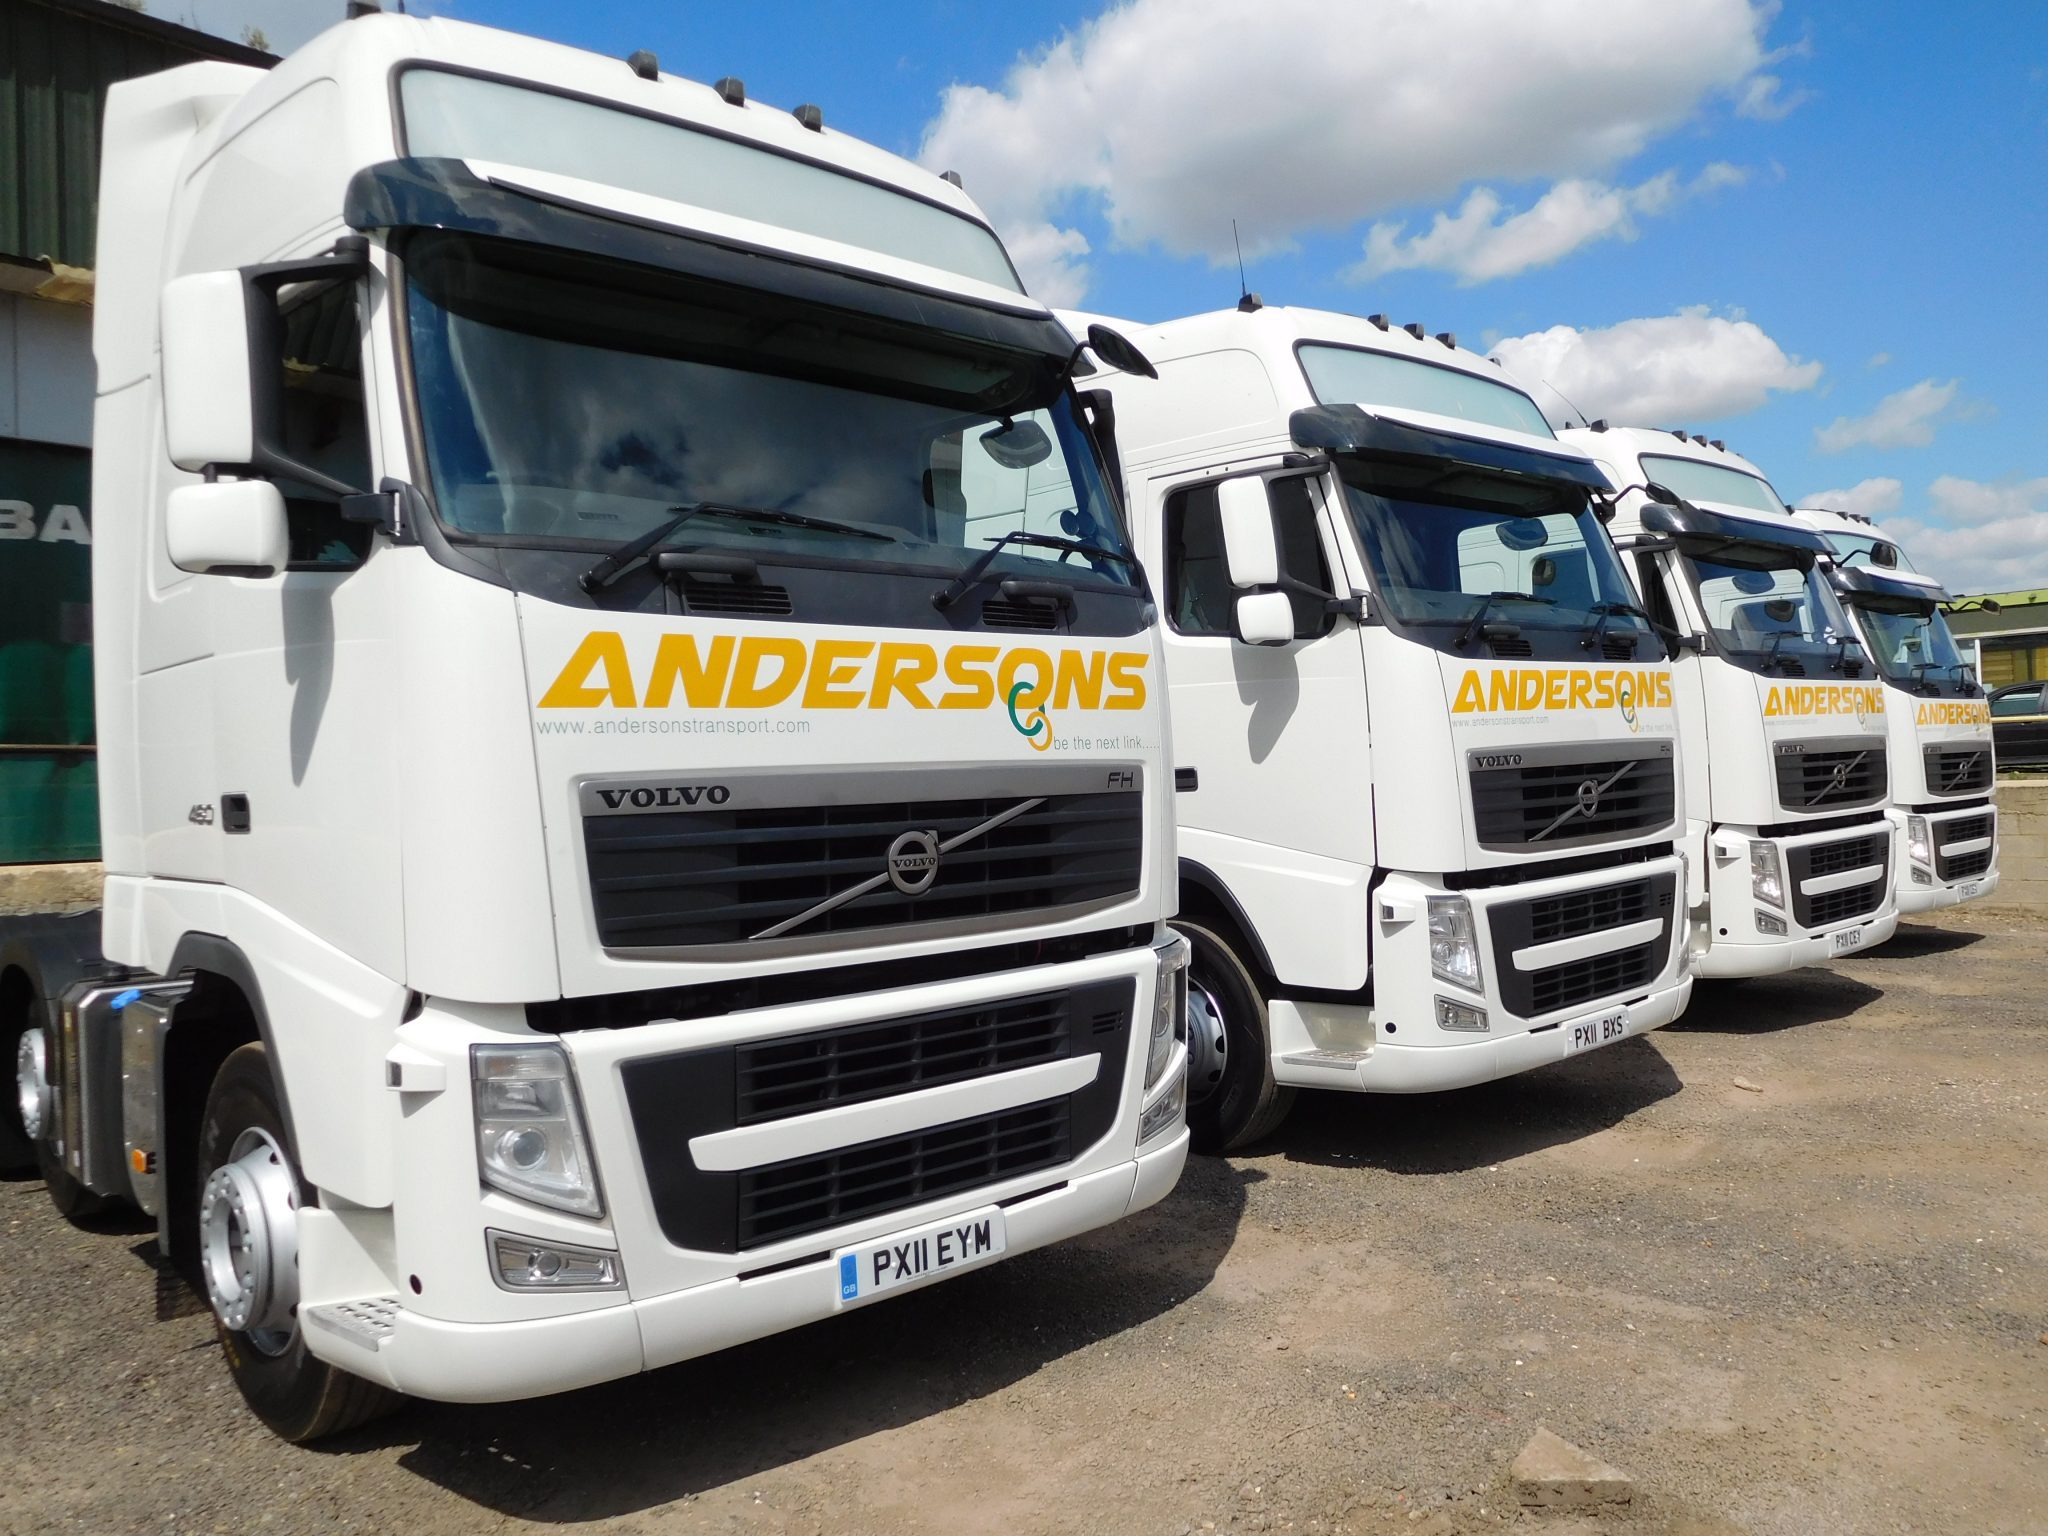 ANDERSONS VOLVO FH12 Trucks in a row in front of loading bays